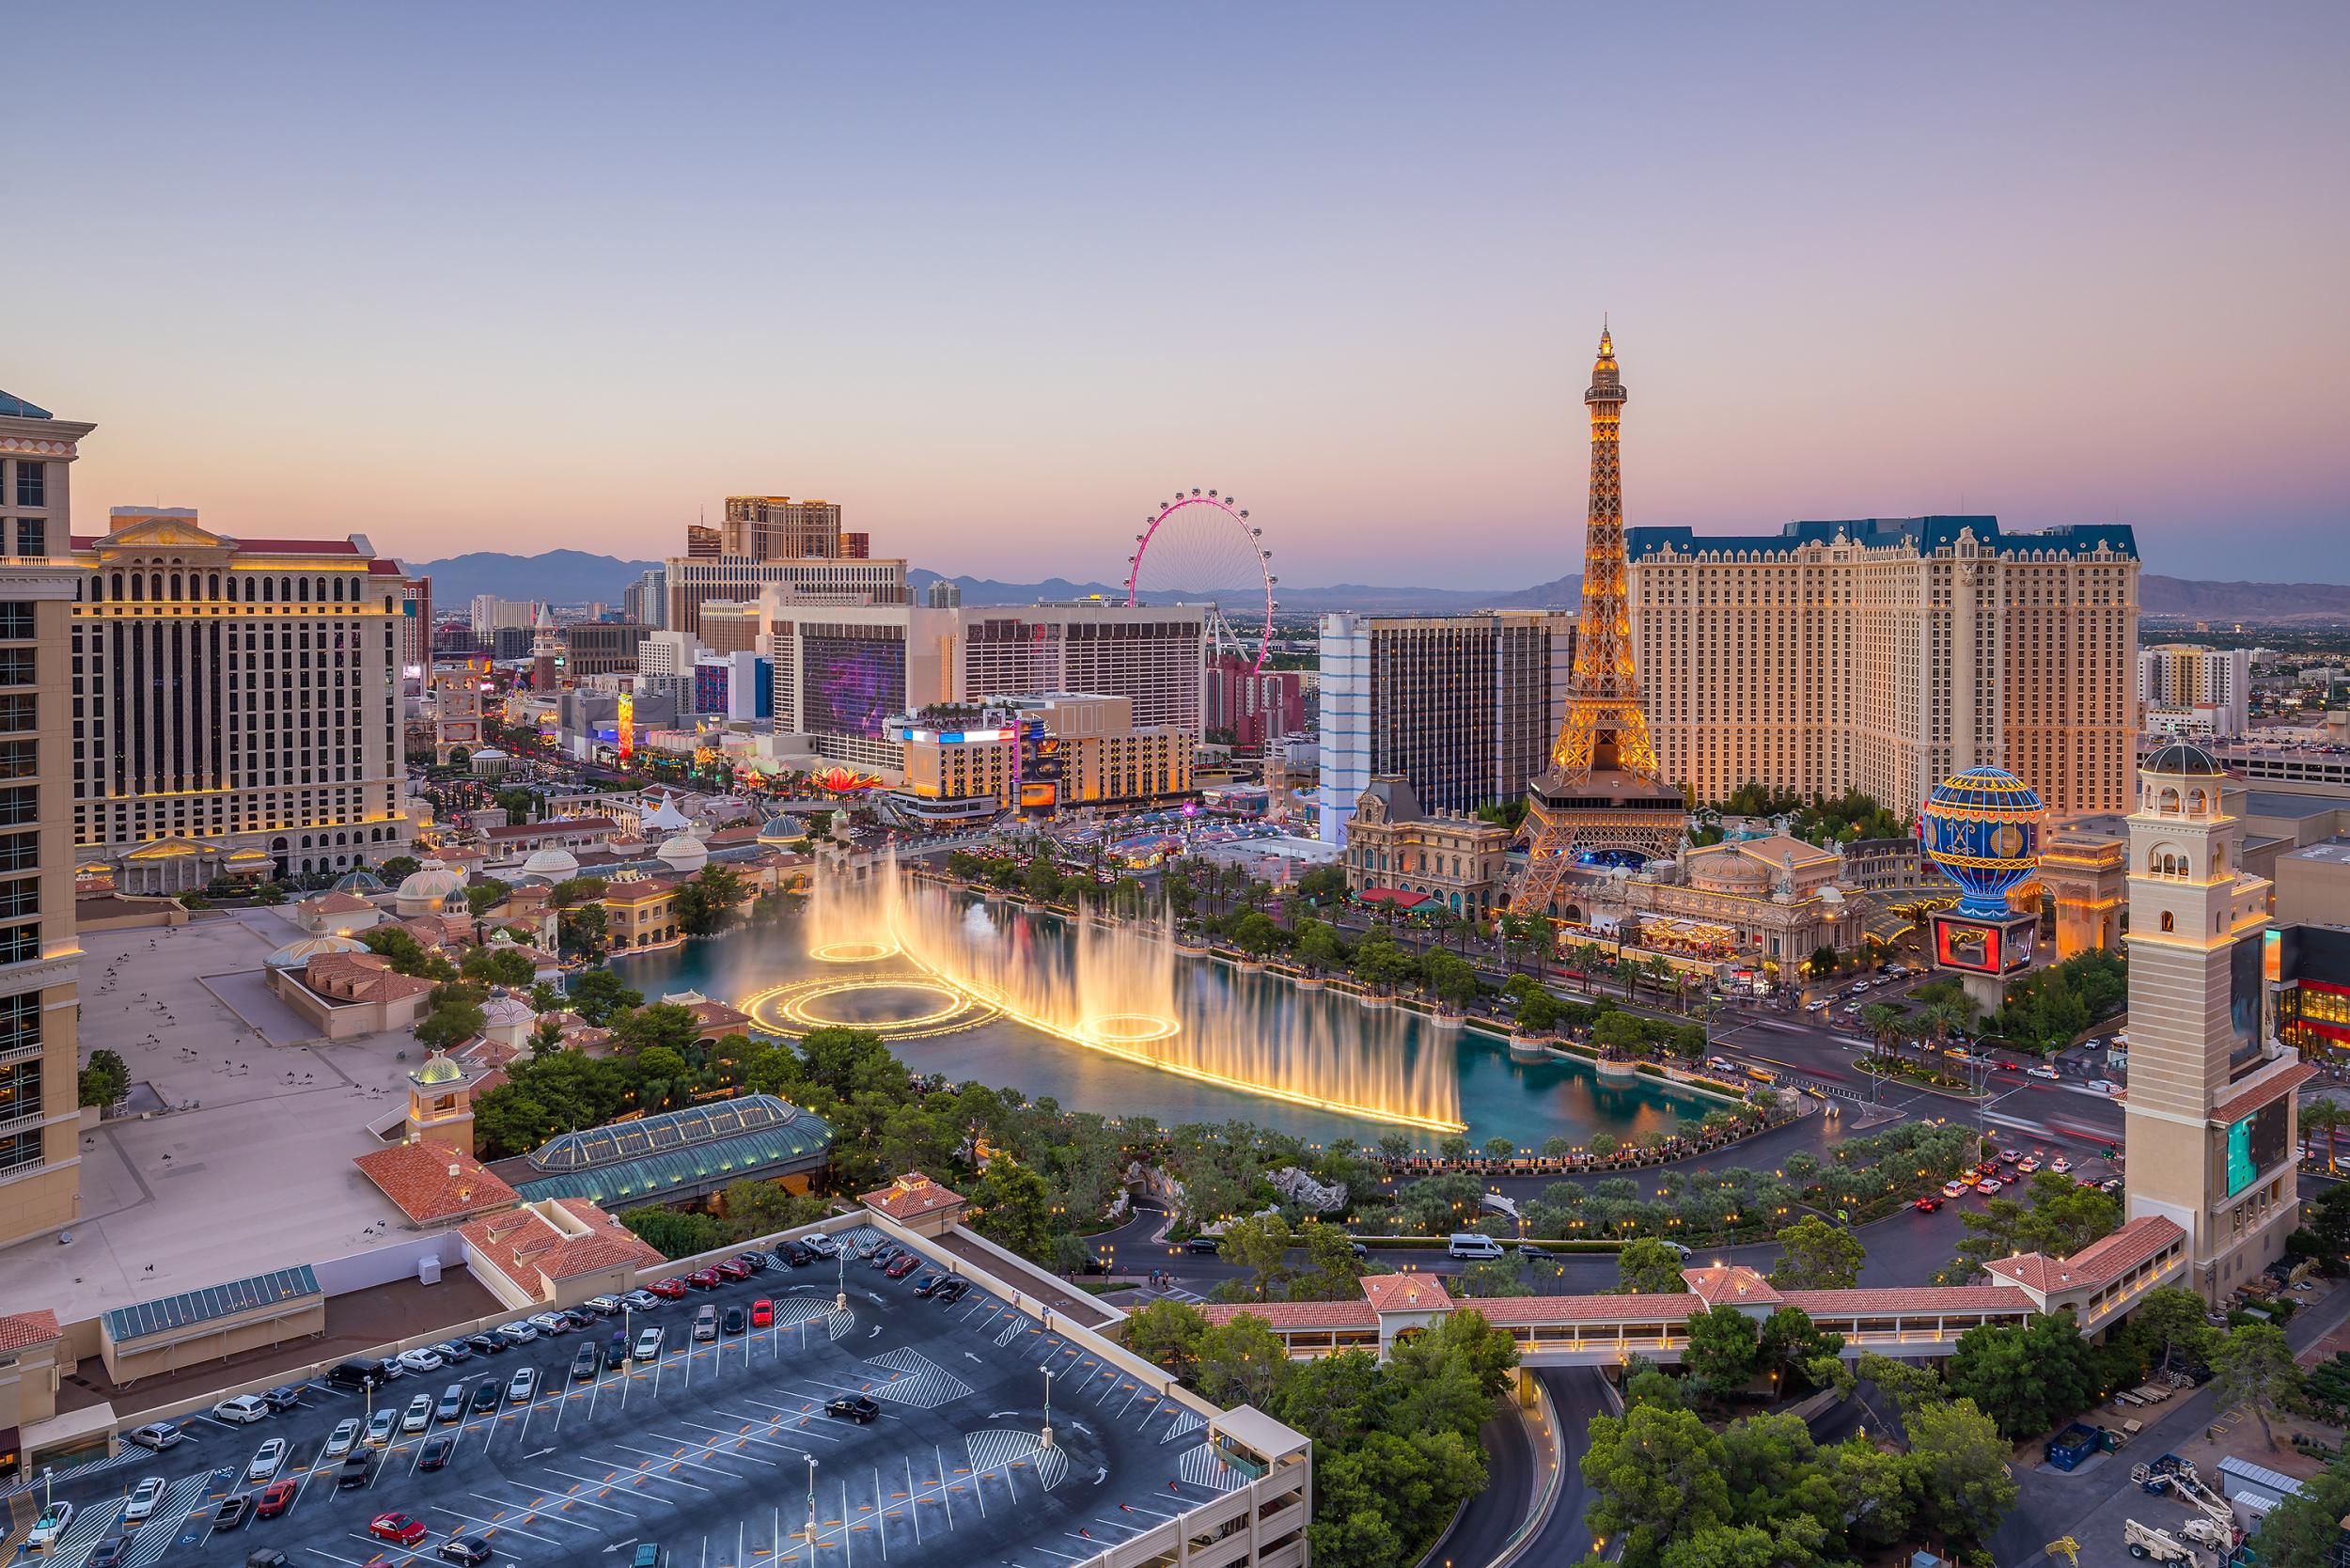 Properties on the Las Vegas Strip could be heavily affected by strike action